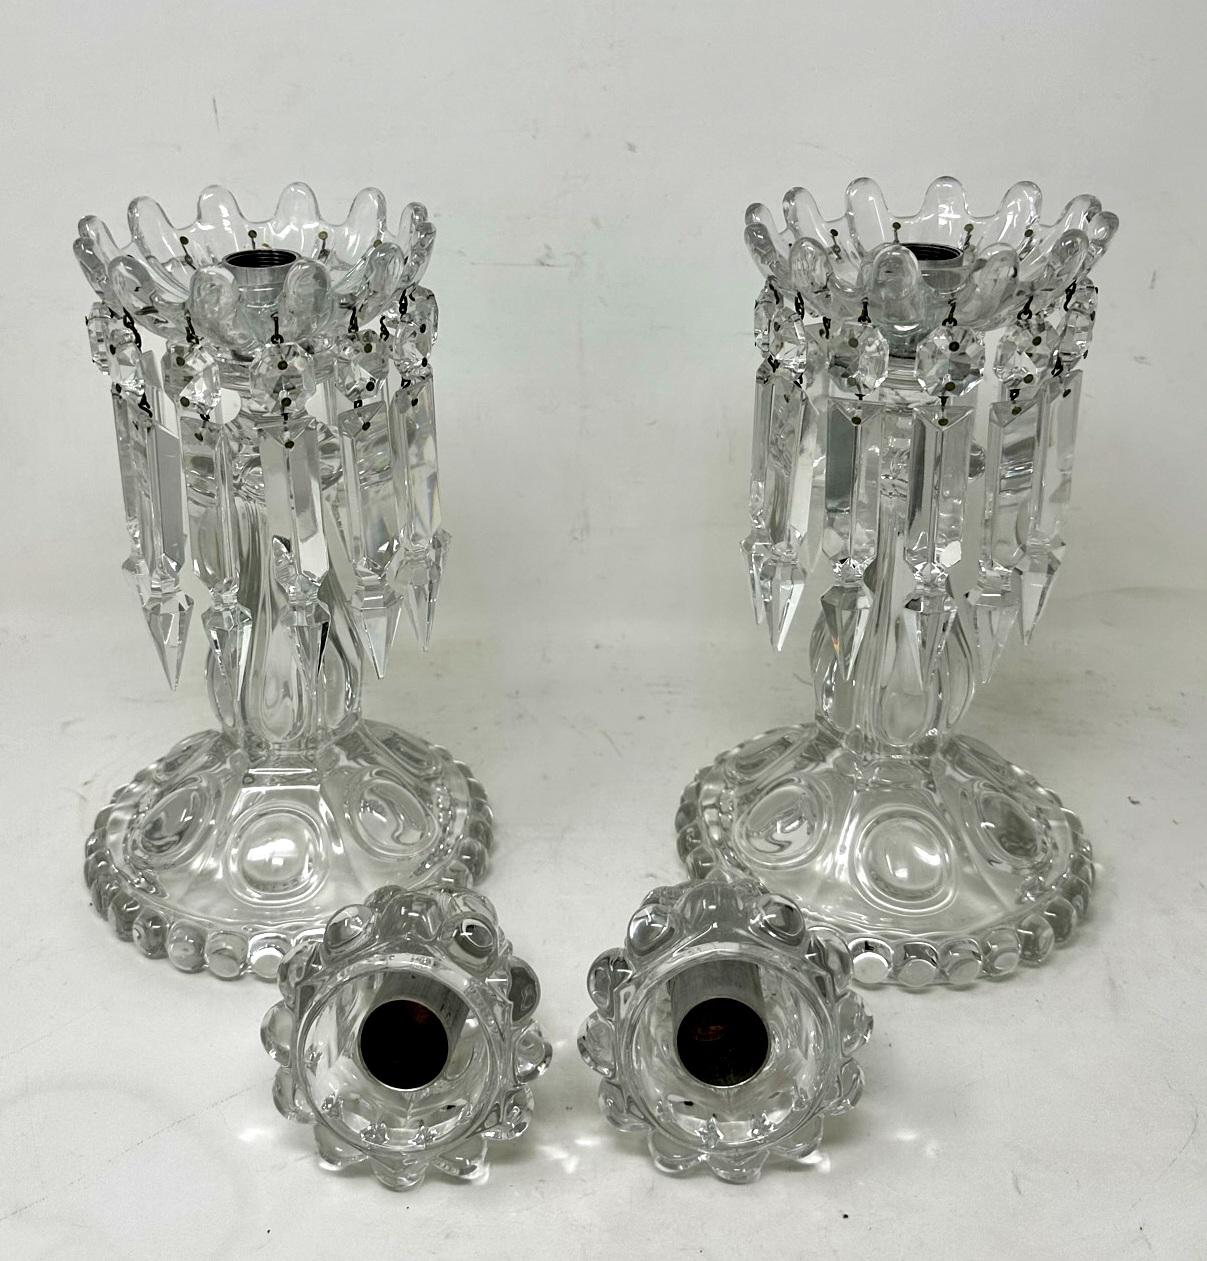 Antique Pair French Baccarat France Full Lead Crystal Candlesticks Candelabra 1